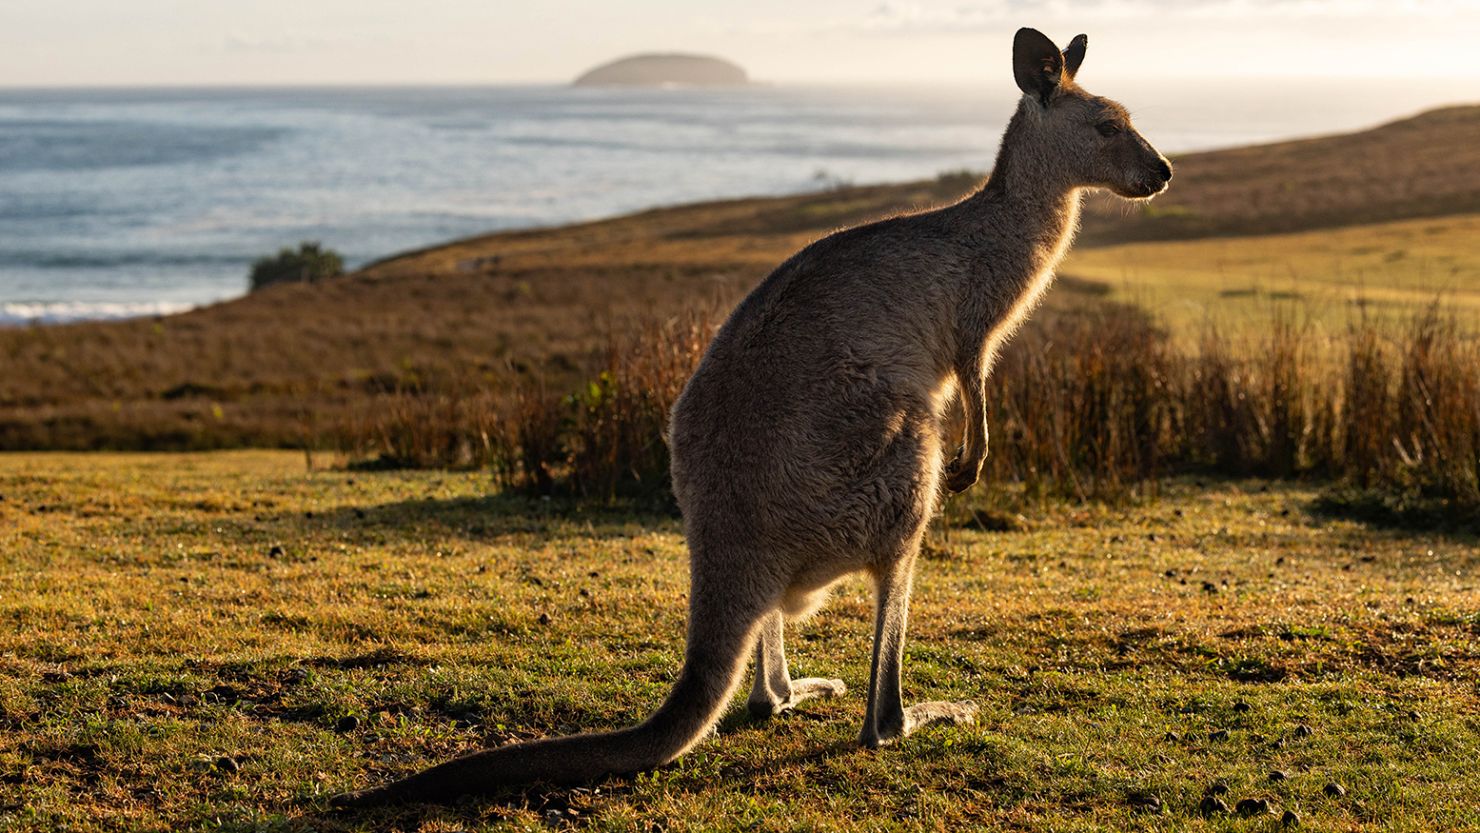 An eastern grey kangaroo is seen in Coffs Harbour, New South Wales, on November 25, 2022.